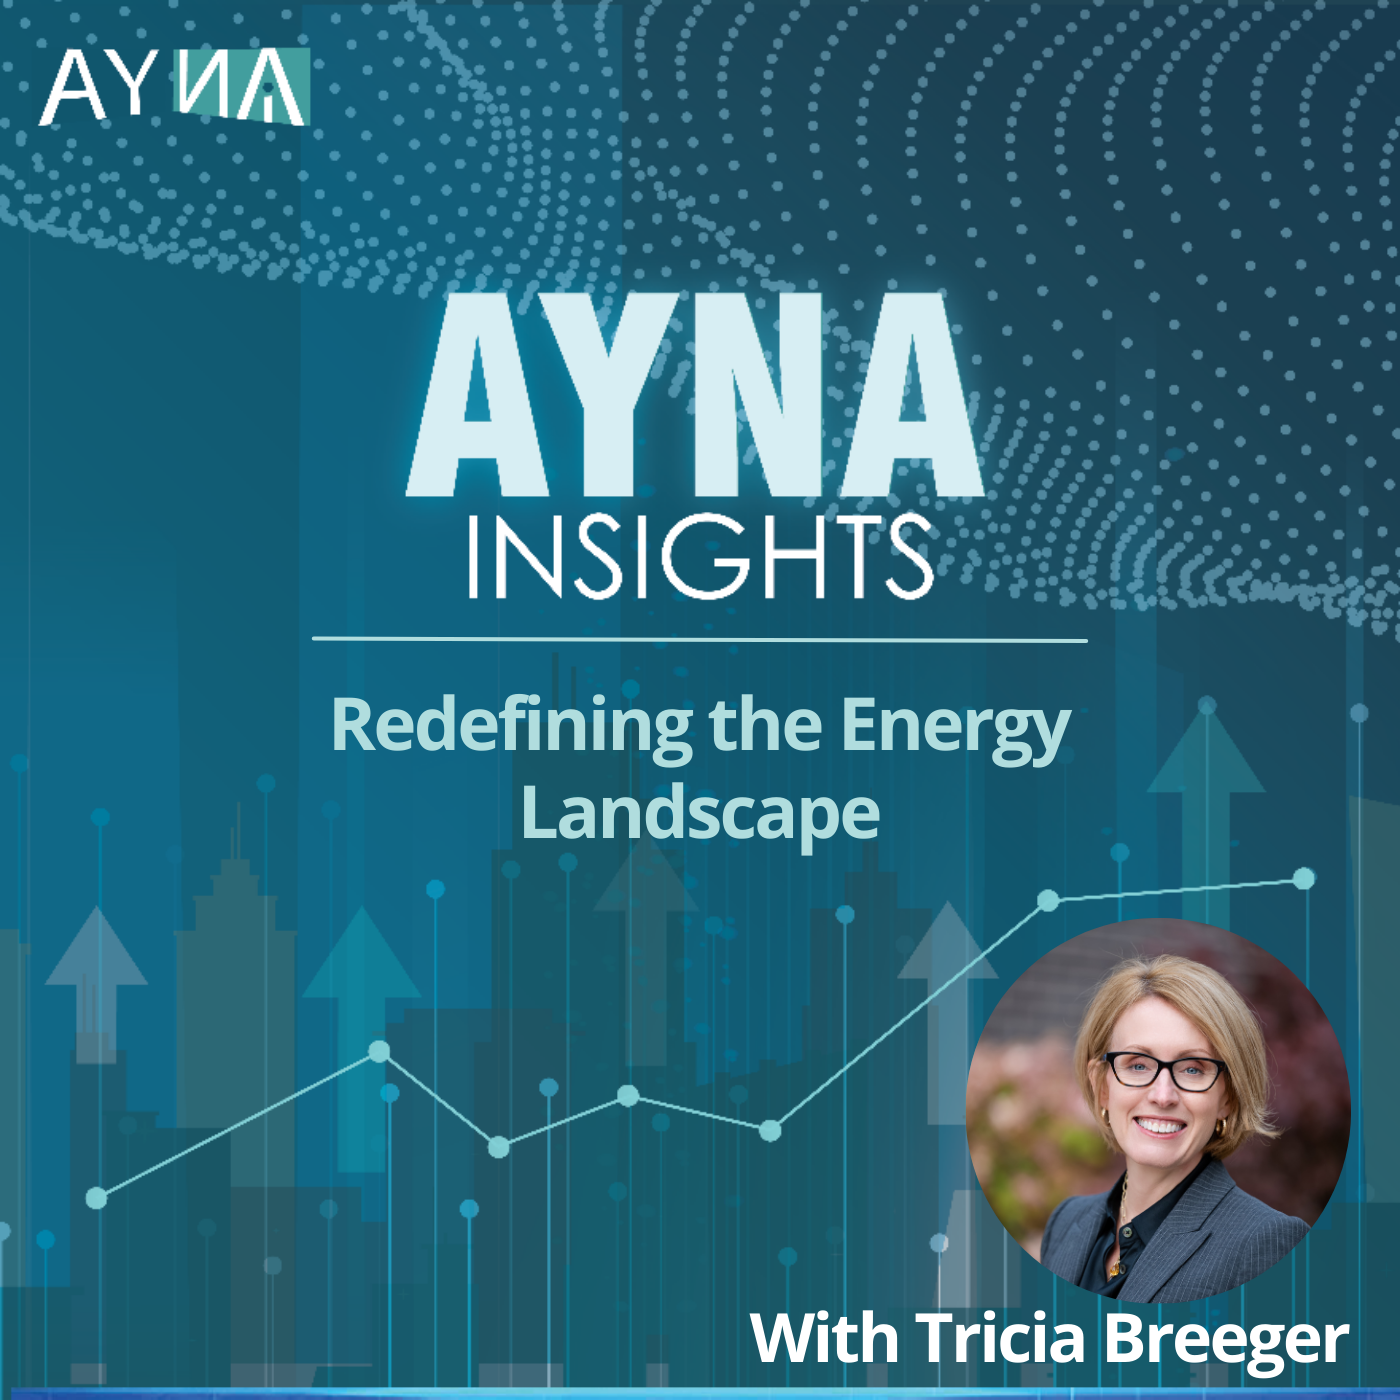 Tricia Breeger: Redefining the Energy Landscape